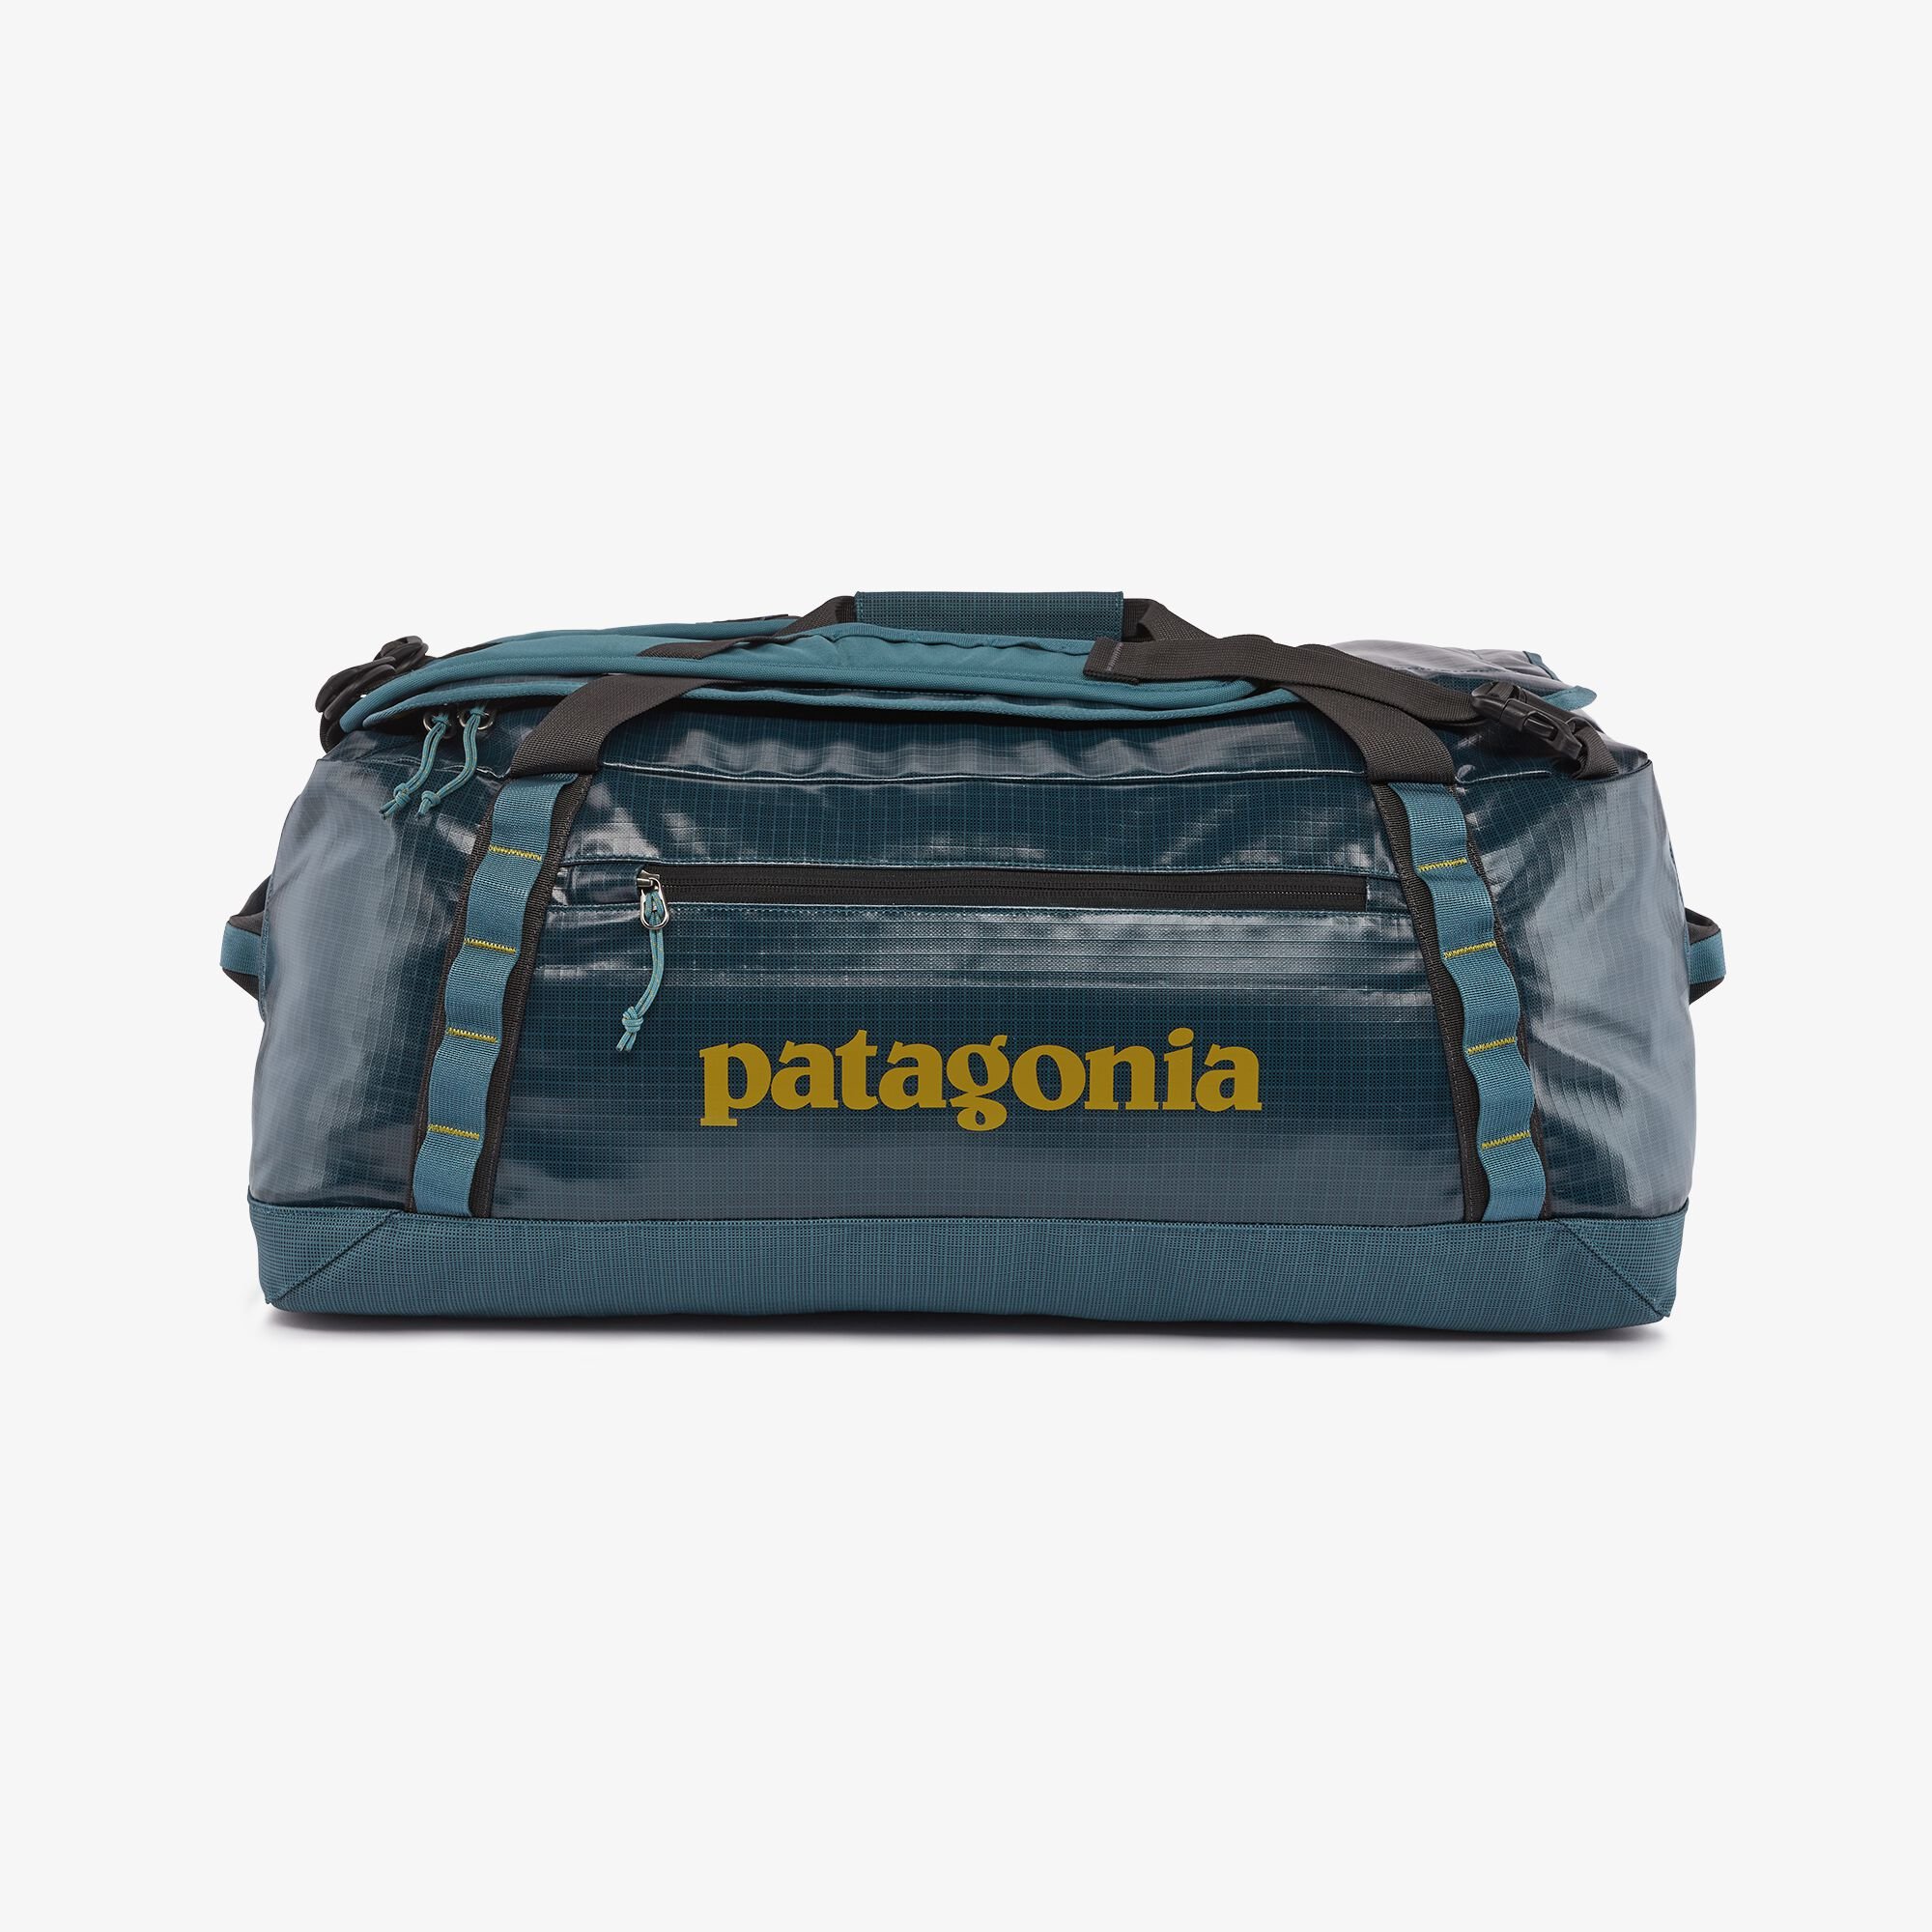 Patagonia Black Hole Duffel Bag 55L Abalone Blue with Ink Black